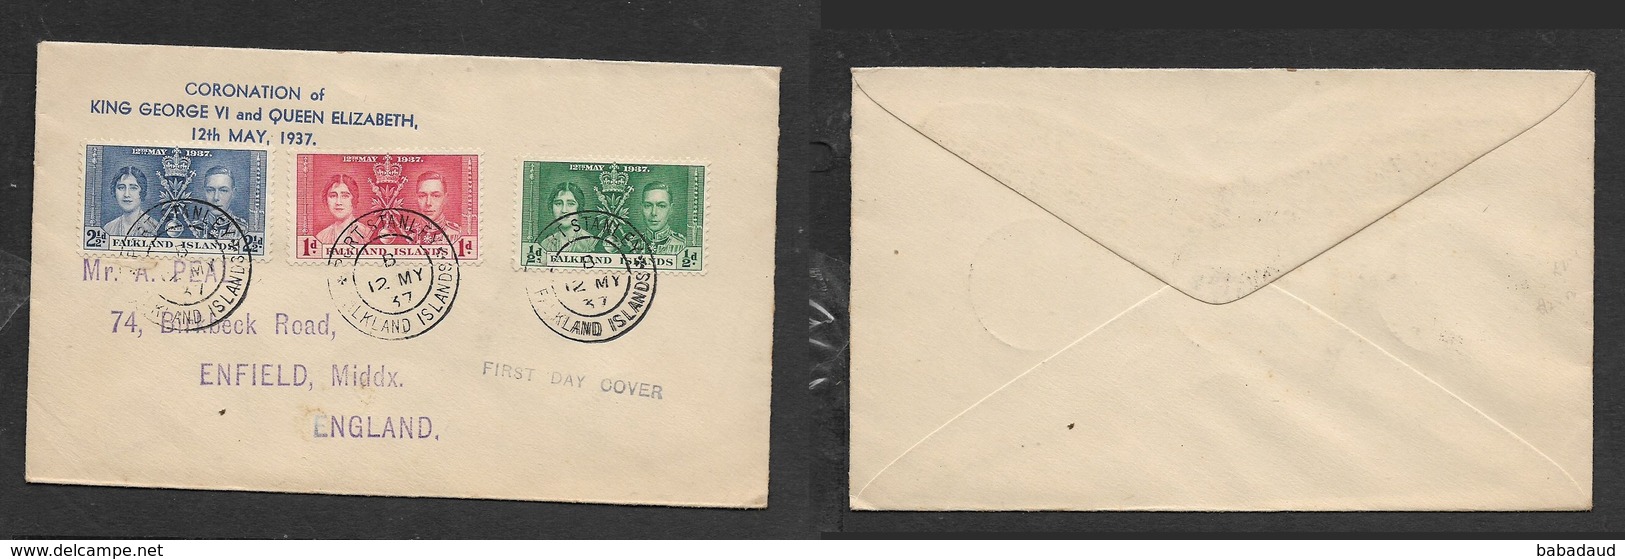 FALKLAND ISLANDS George VI Coronation  First Day Cover, Registered PORT STANLEY  12 MAY 37 > England - Falkland Islands